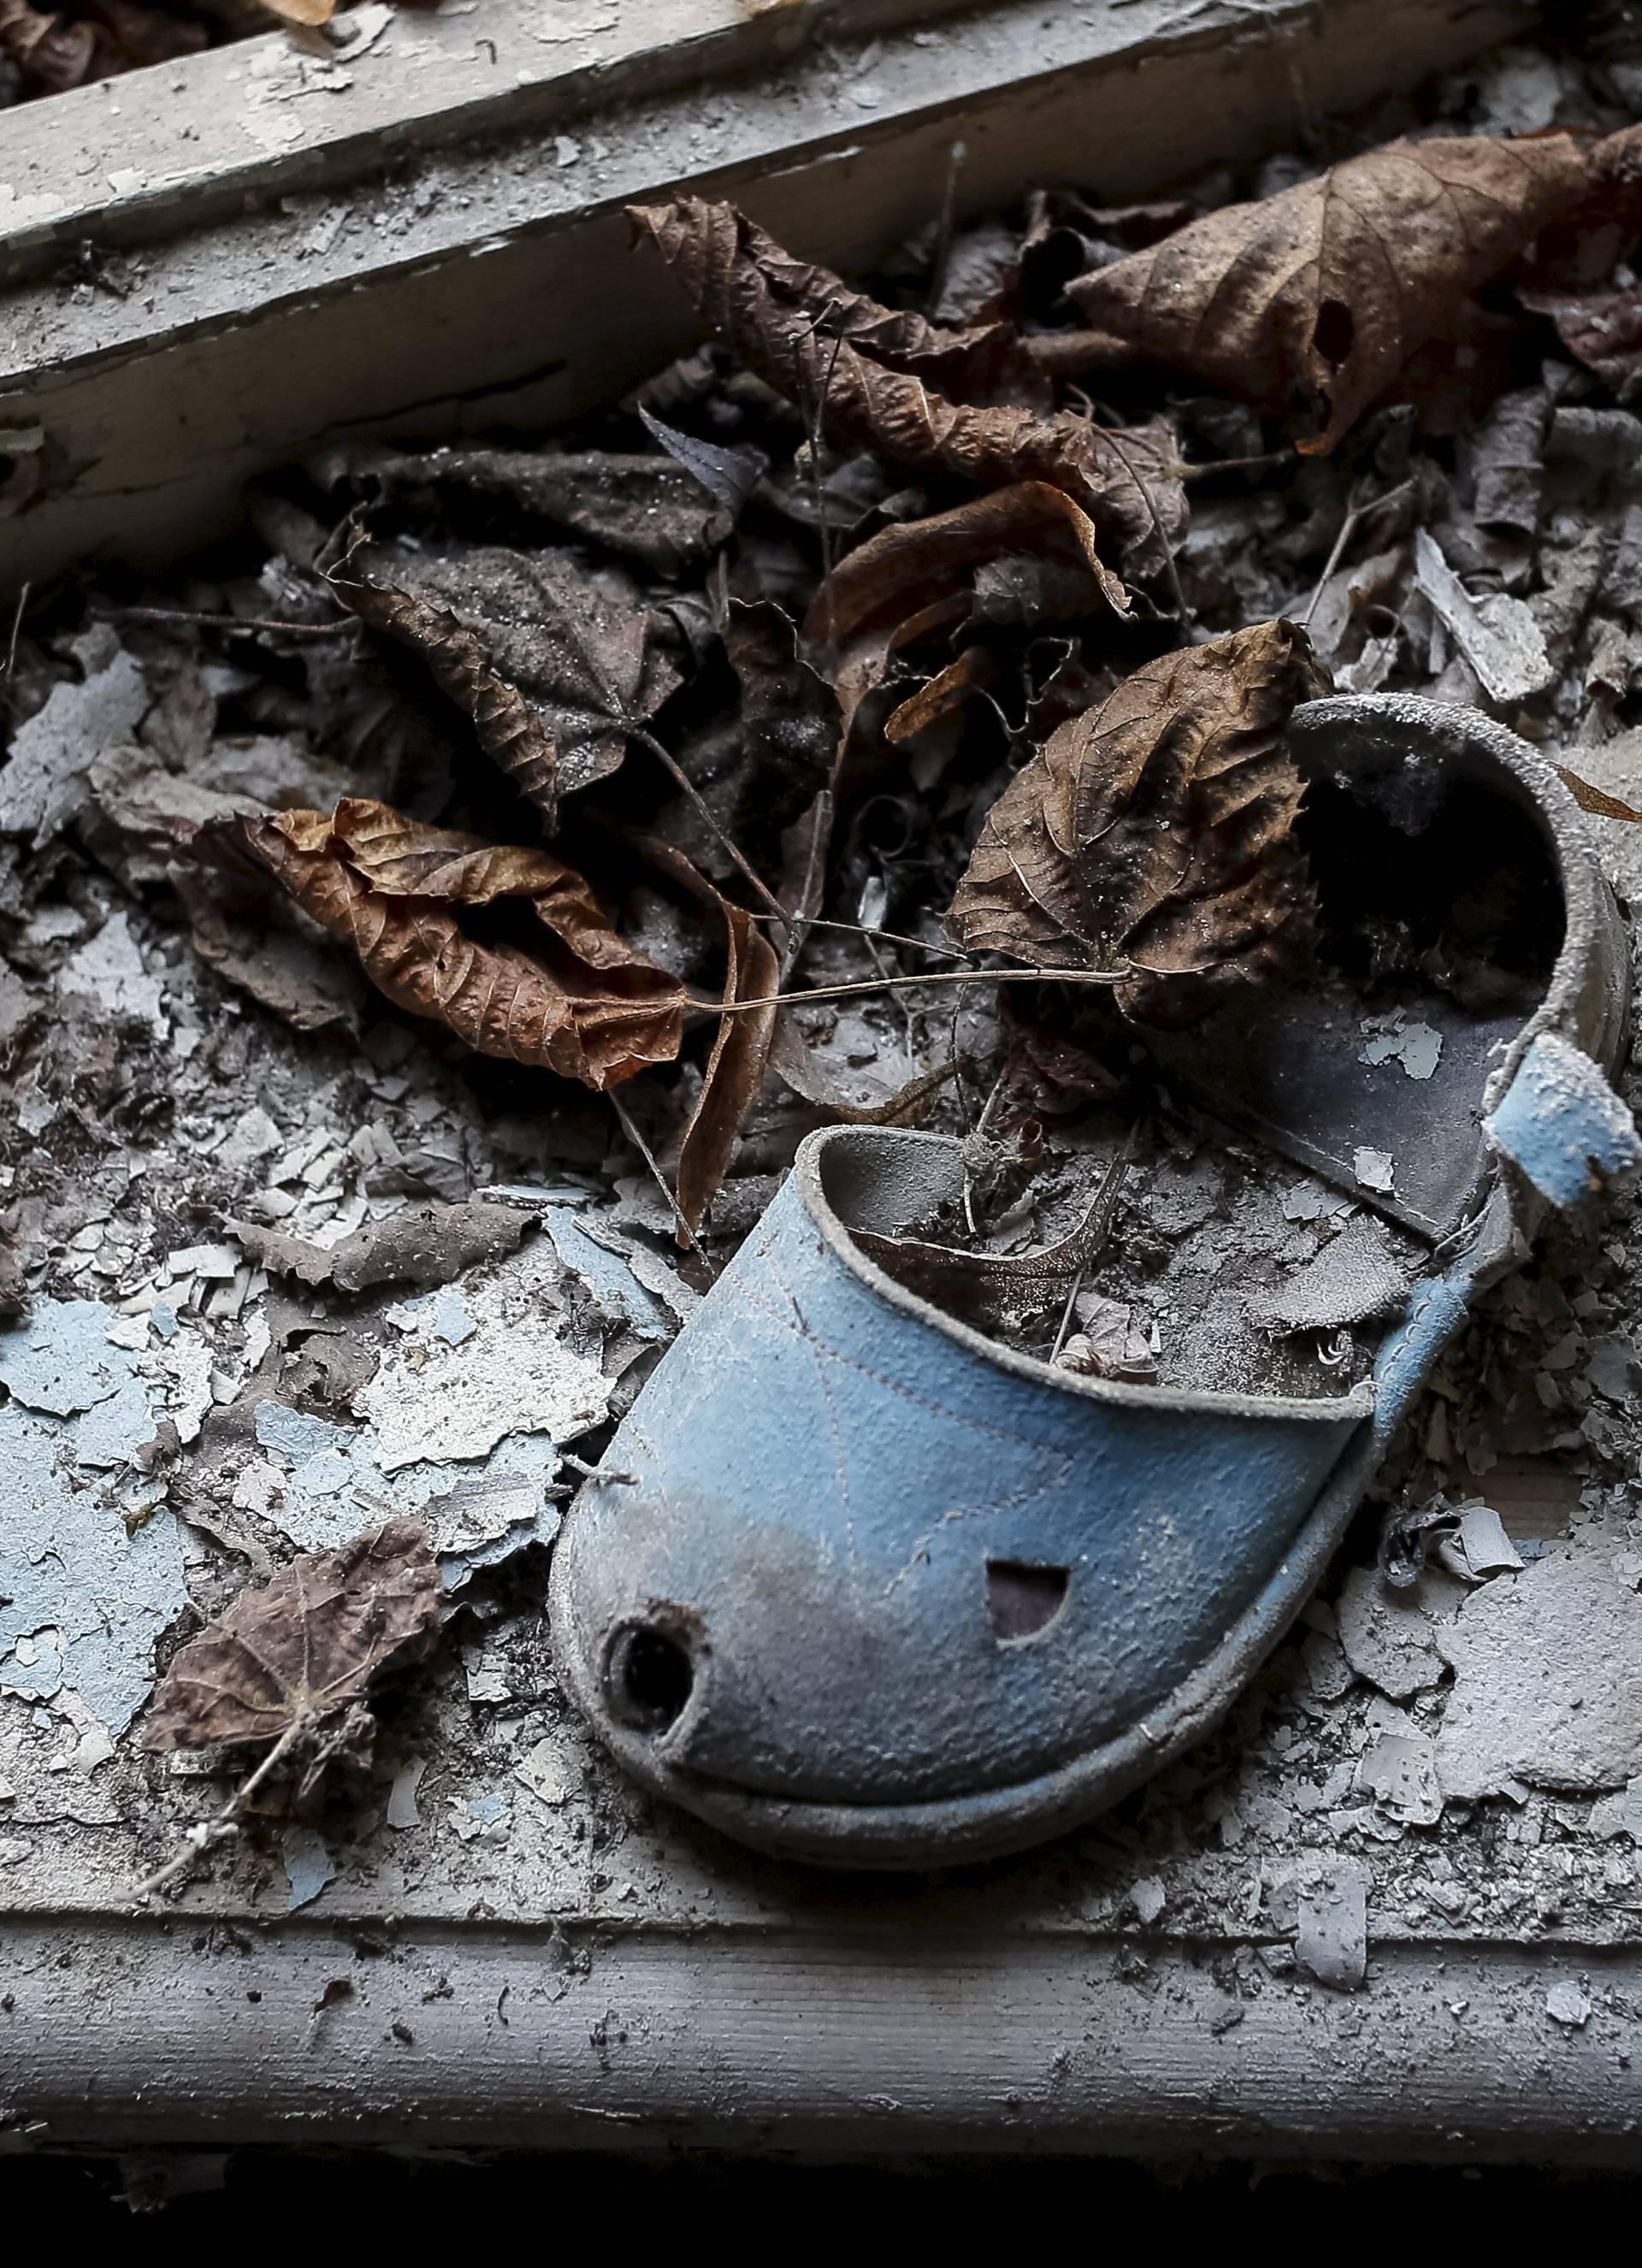 A shoe for children is left in a kindergarten in the abandoned city of Pripyat near the Chernobyl nuclear power plant